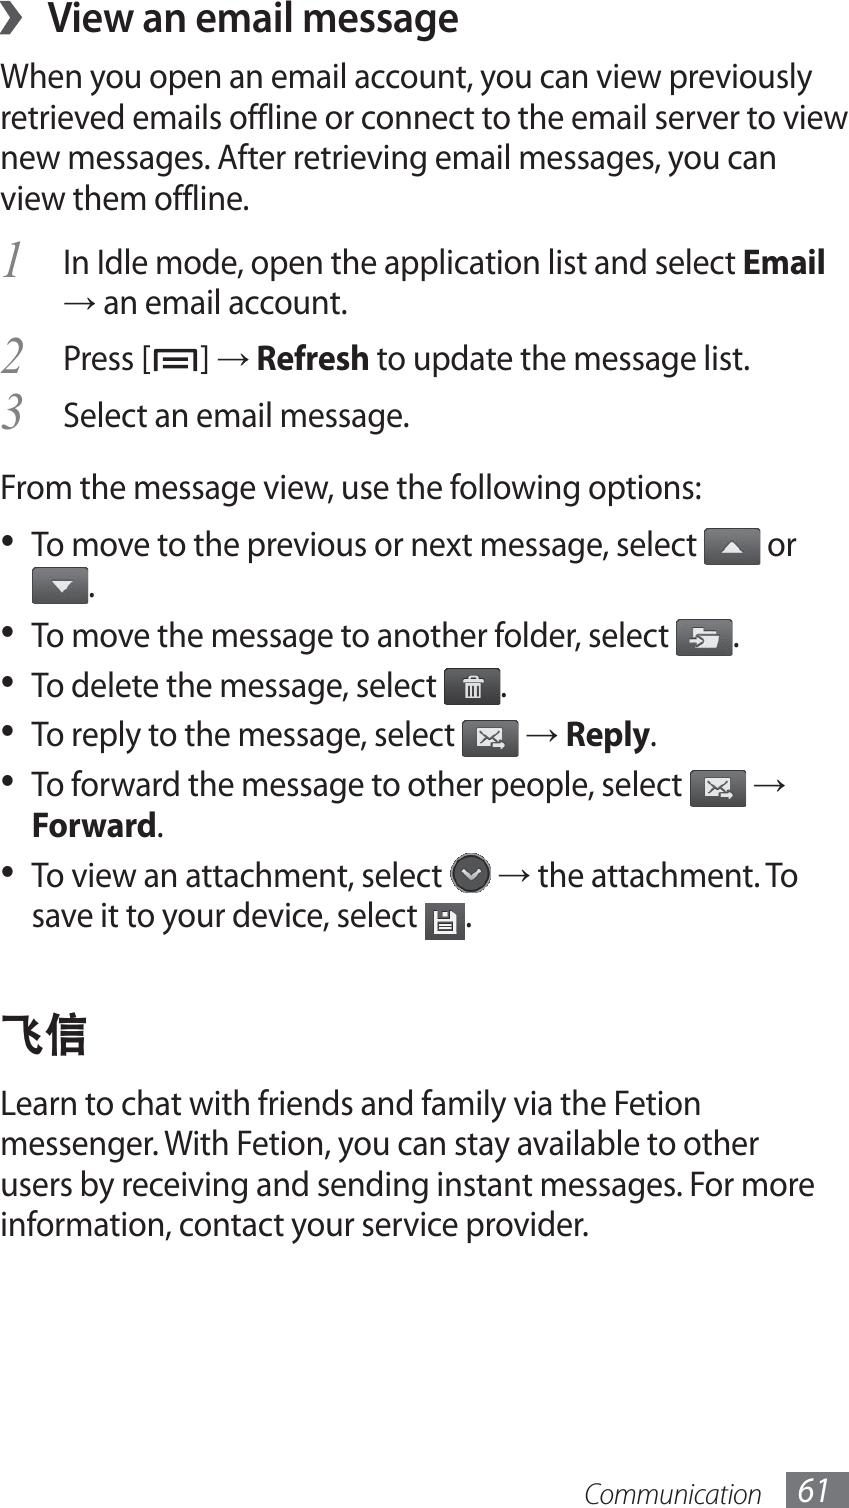 Communication 61View an email message ›When you open an email account, you can view previously retrieved emails offline or connect to the email server to view new messages. After retrieving email messages, you can view them offline.In Idle mode, open the application list and select 1 Email → an email account.Press [2 ] → Refresh to update the message list.Select an email message.3 From the message view, use the following options:To move to the previous or next message, select •   or .To move the message to another folder, select •  .To delete the message, select •  .To reply to the message, select •   → Reply.To forward the message to other people, select •   → Forward.To view an attachment, select •   → the attachment. To save it to your device, select  .ࠀᄪLearn to chat with friends and family via the Fetion messenger. With Fetion, you can stay available to other users by receiving and sending instant messages. For more information, contact your service provider.